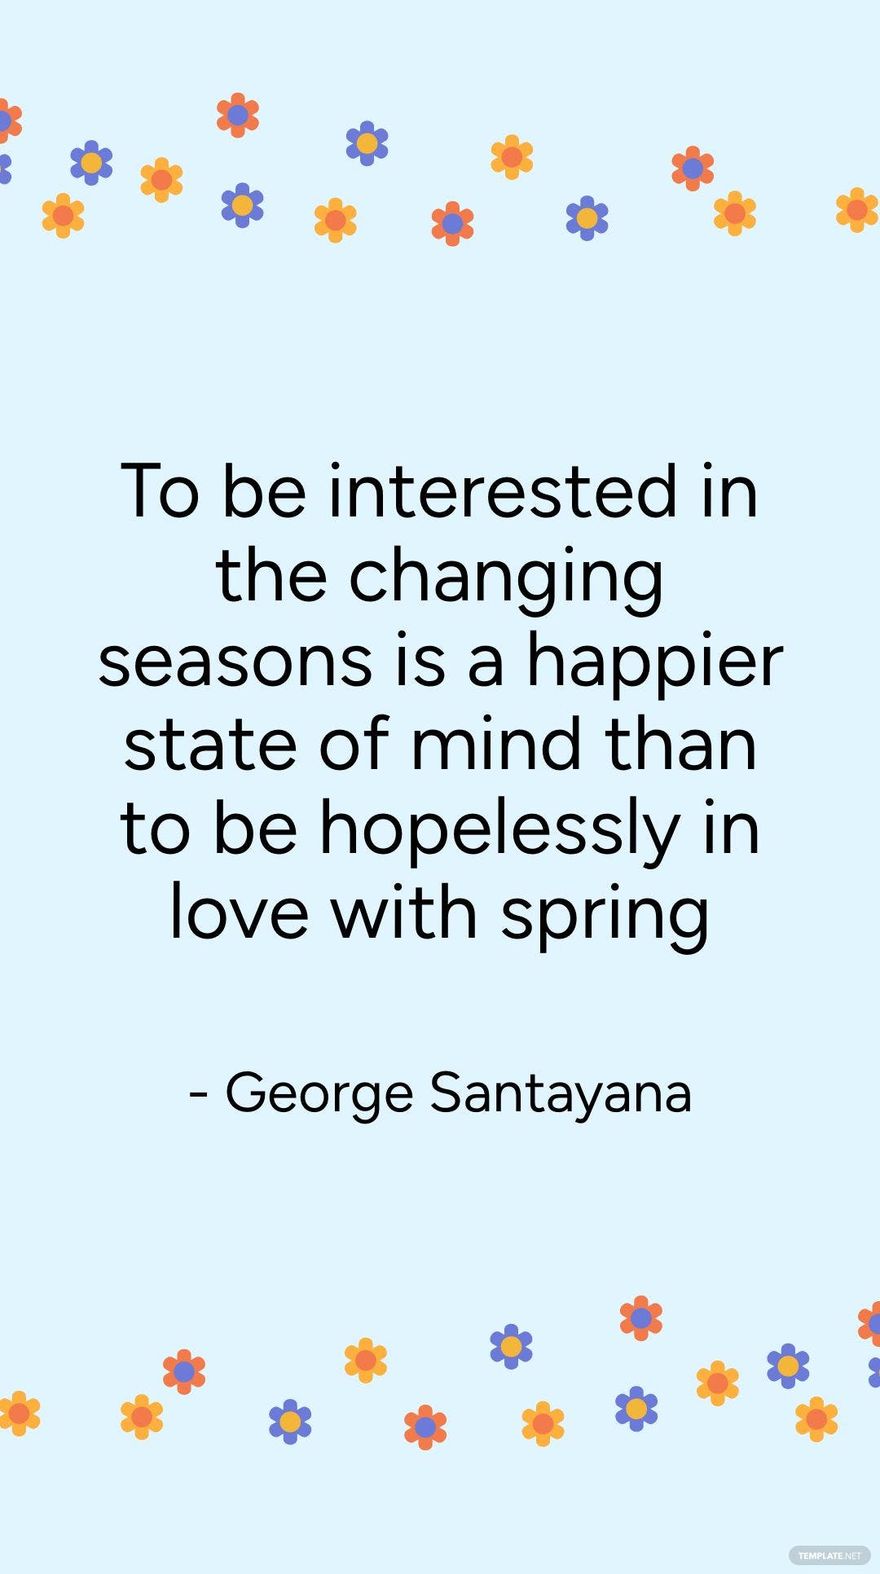 George Santayana - To be interested in the changing seasons is a happier state of mind than to be hopelessly in love with spring